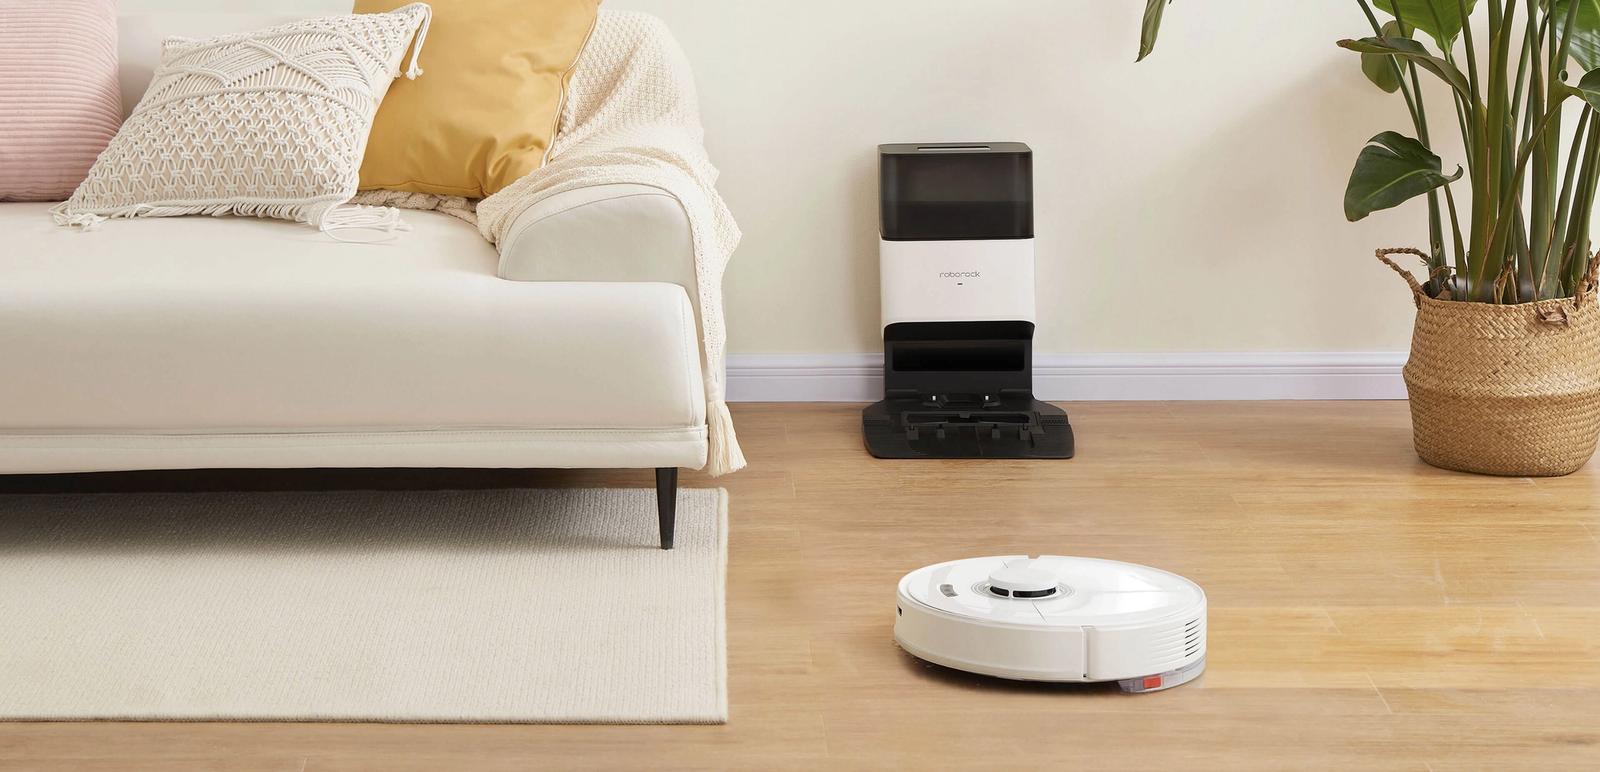 Are robot vacuums worth it? 2